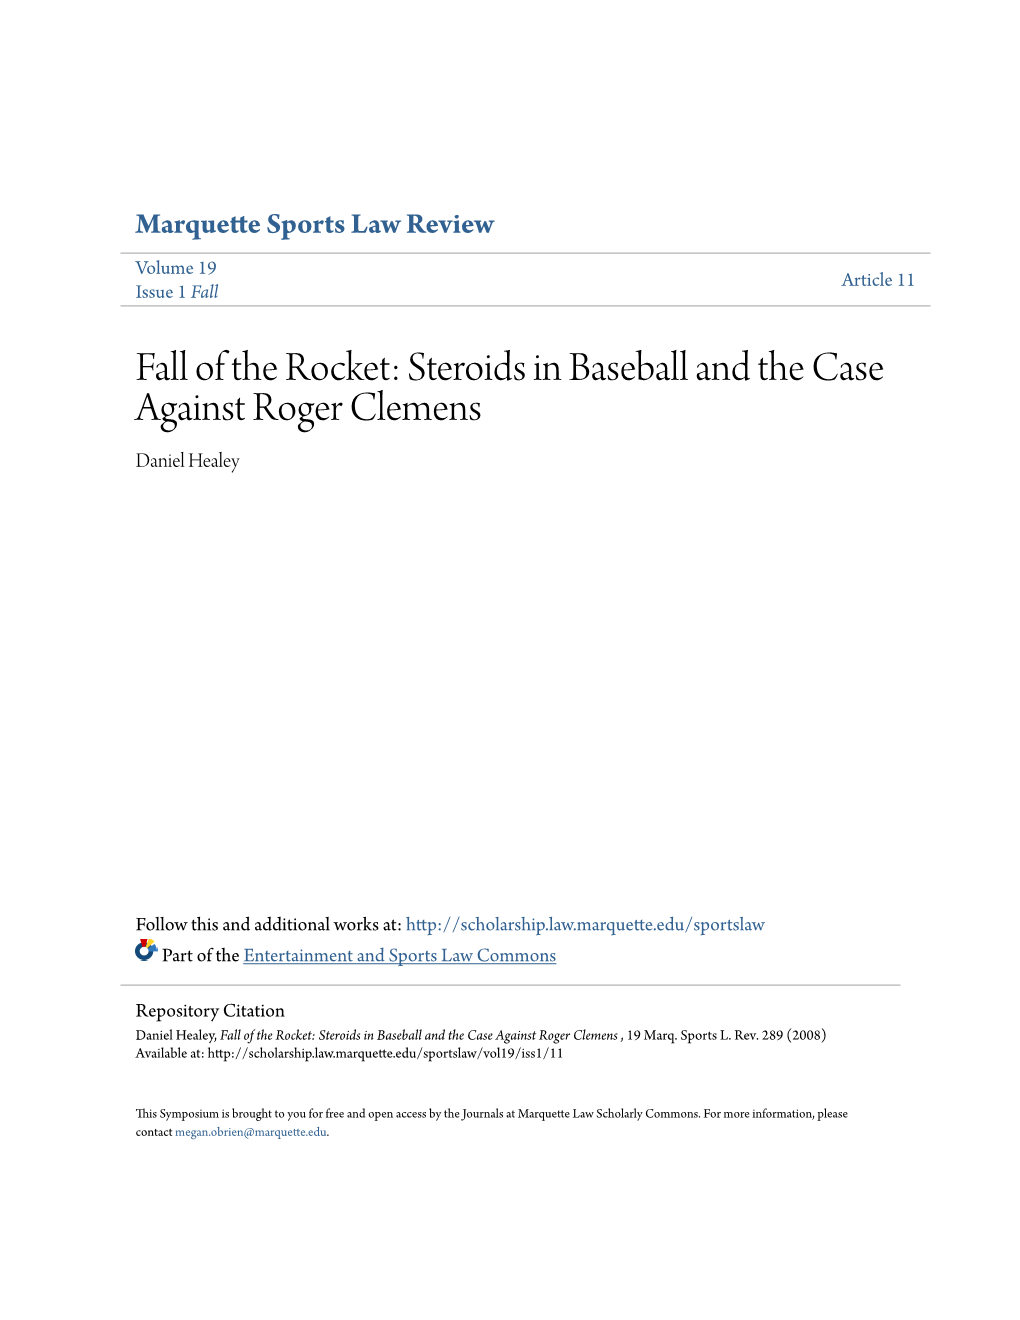 Steroids in Baseball and the Case Against Roger Clemens Daniel Healey